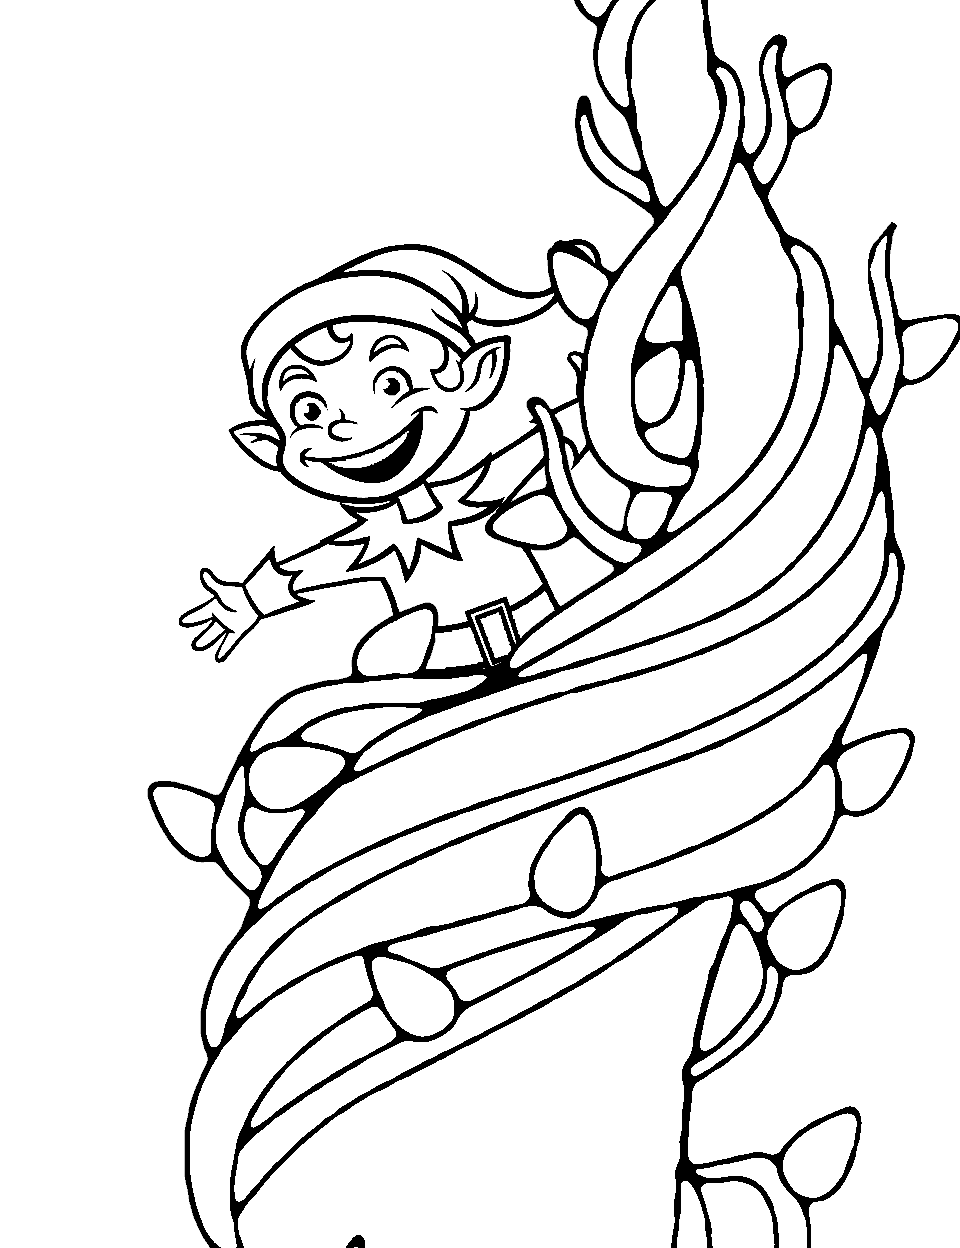 Elf Climbing a Giant Beanstalk Coloring Page - An adventurous elf climbing a towering beanstalk.